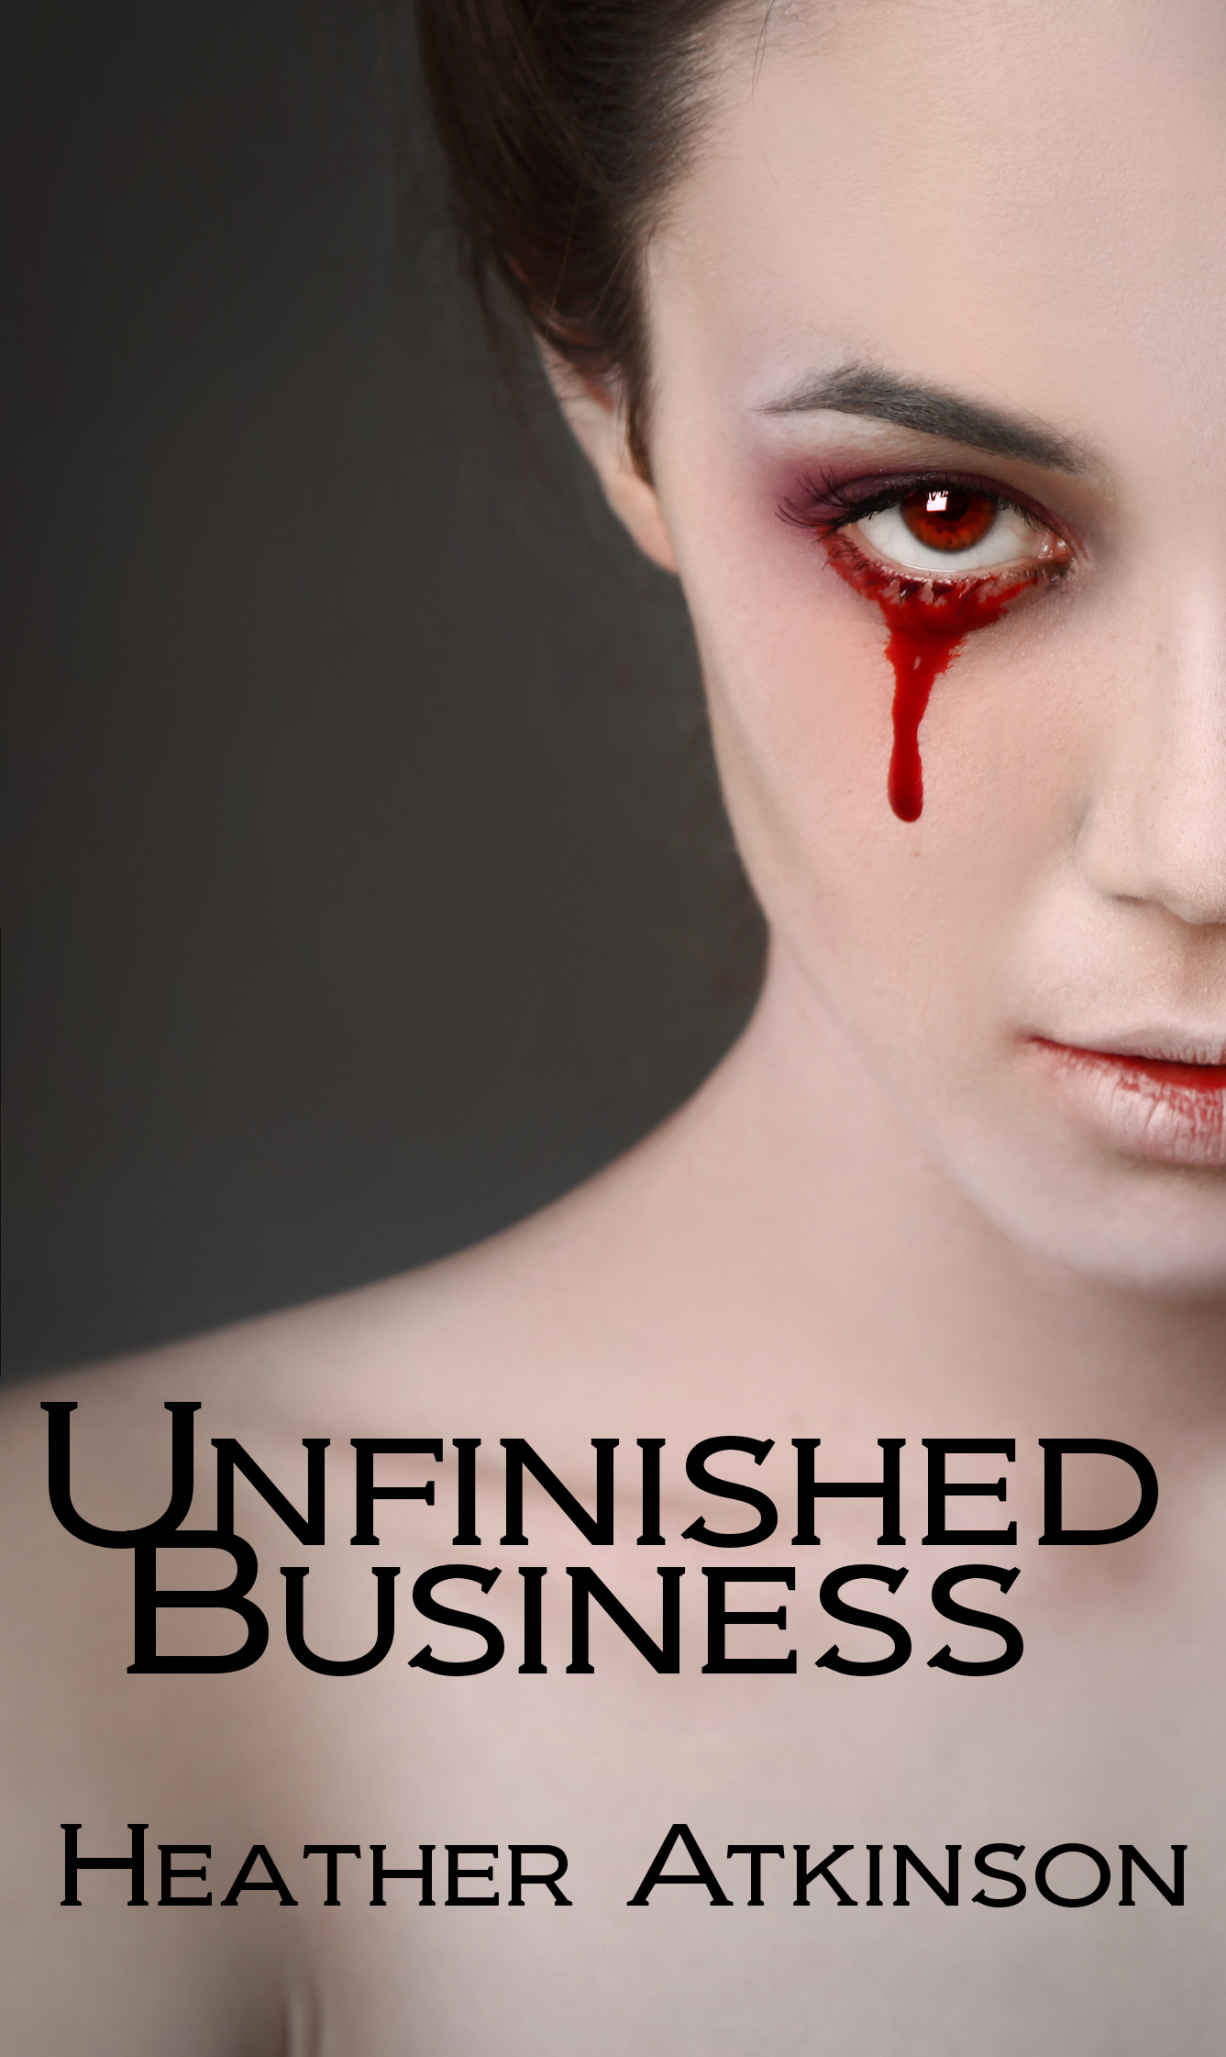 Unfinished Business by Heather Atkinson